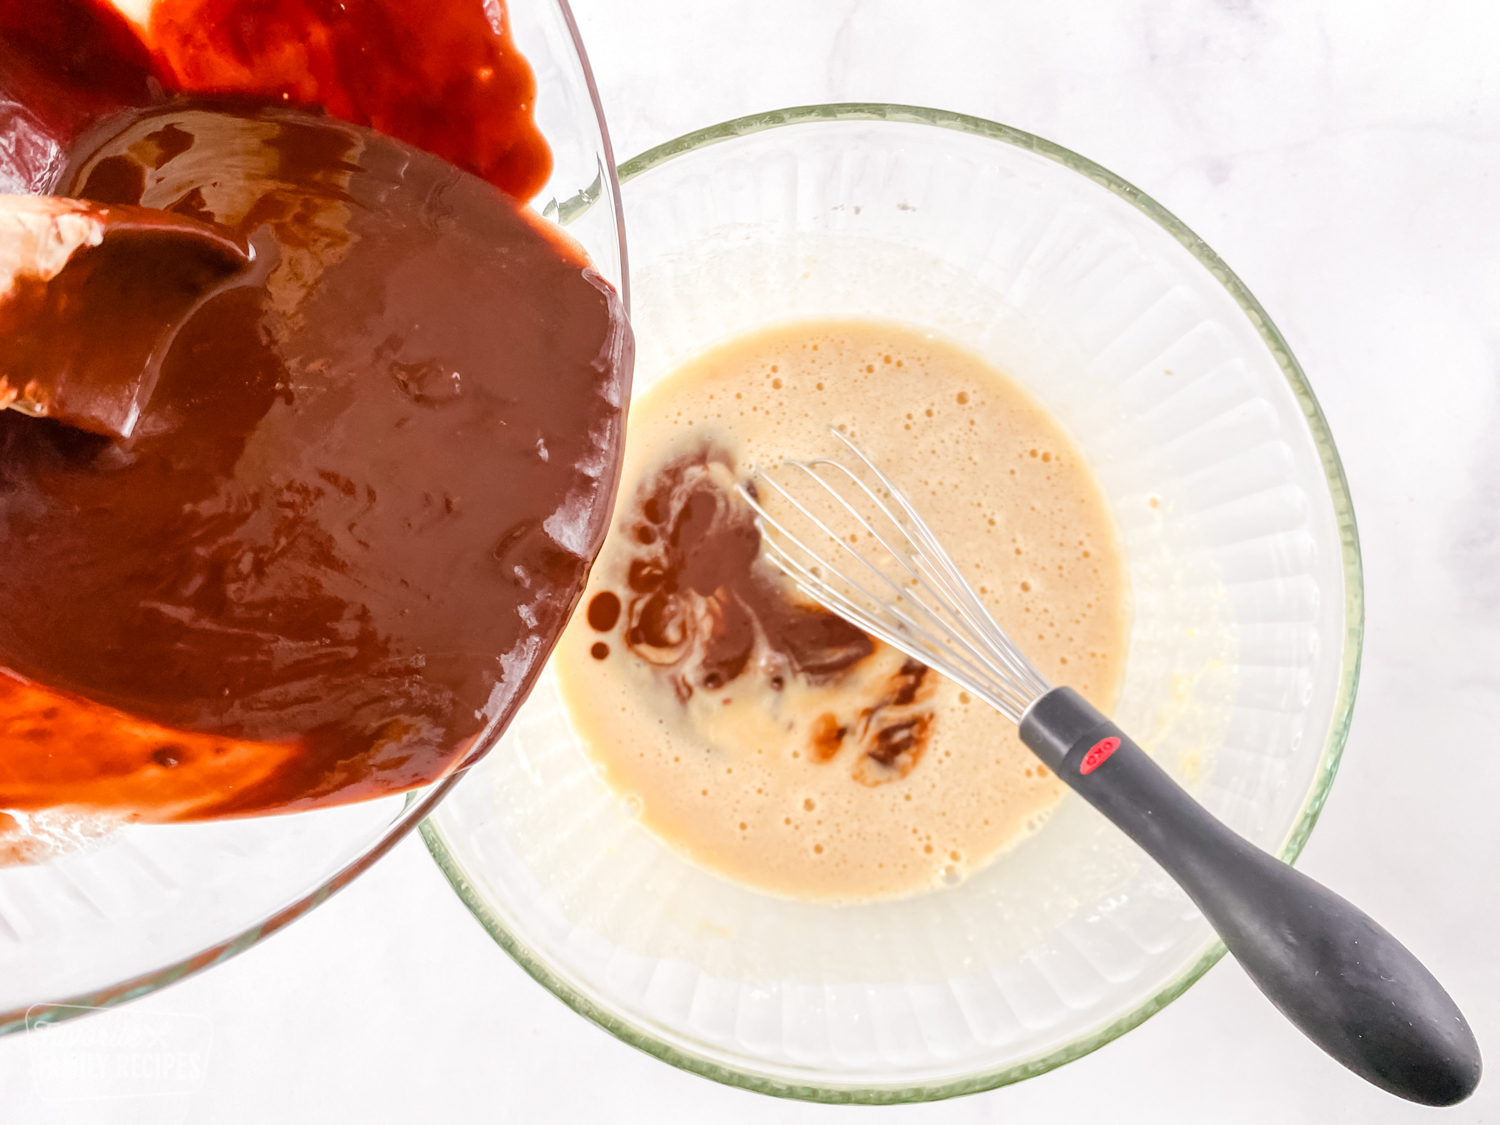 Melted chocolate being poured into a mixture of sugar and eggs to make chocolate lava cake